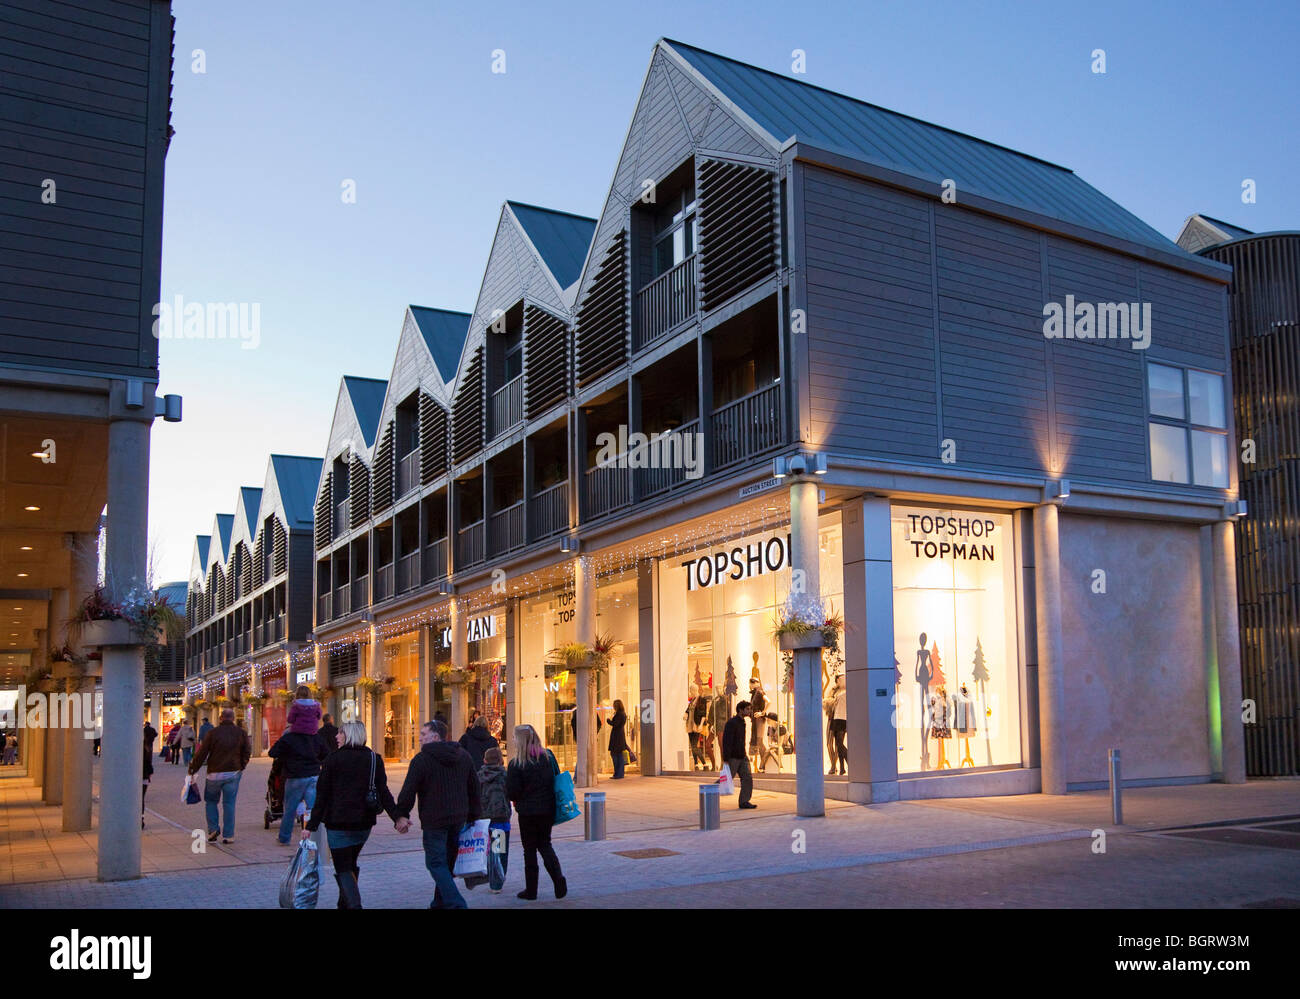 The Arc shopping centre at Bury St Edmunds in Suffolk UK Stock Photo - Alamy